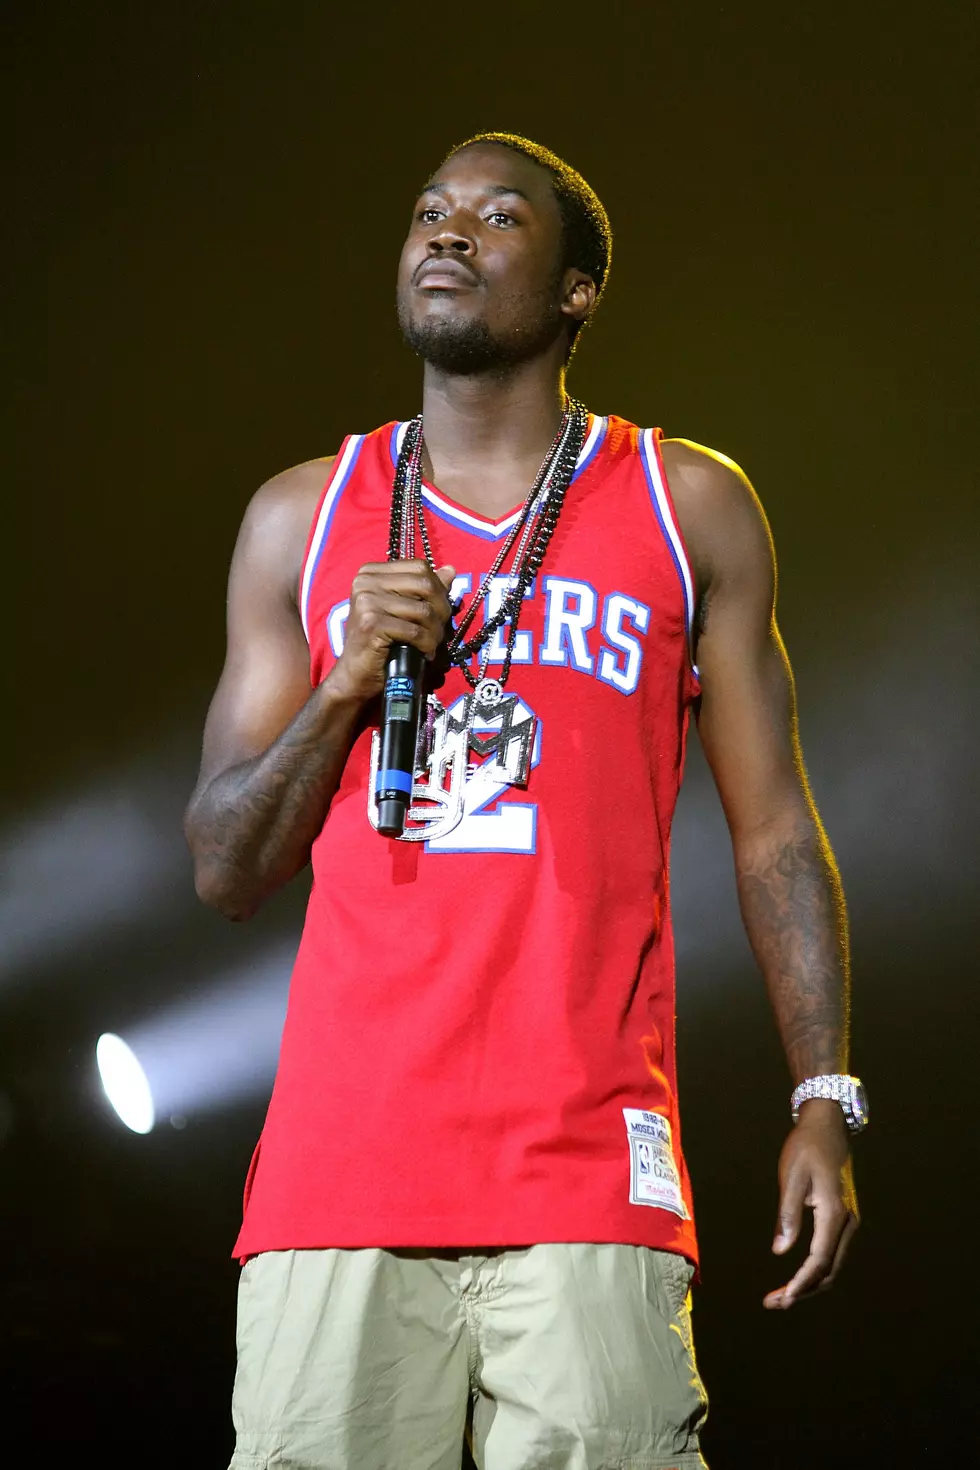 UPNORTHTRIPS — 100 Rappers in Sports Jerseys Remember how